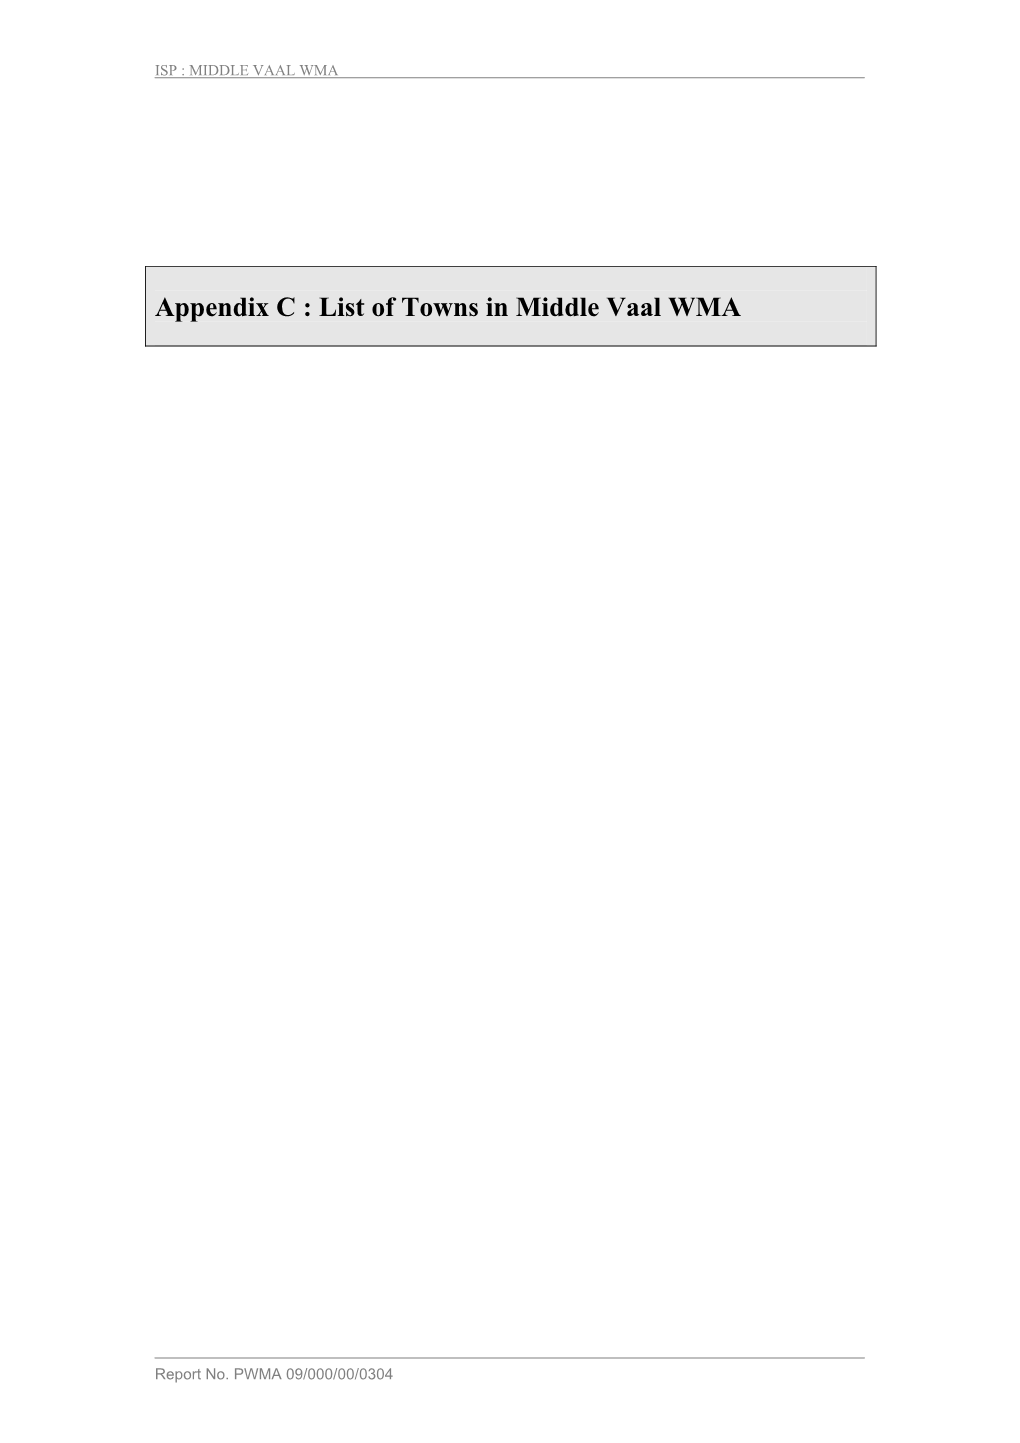 Appendix C : List of Towns in Middle Vaal WMA